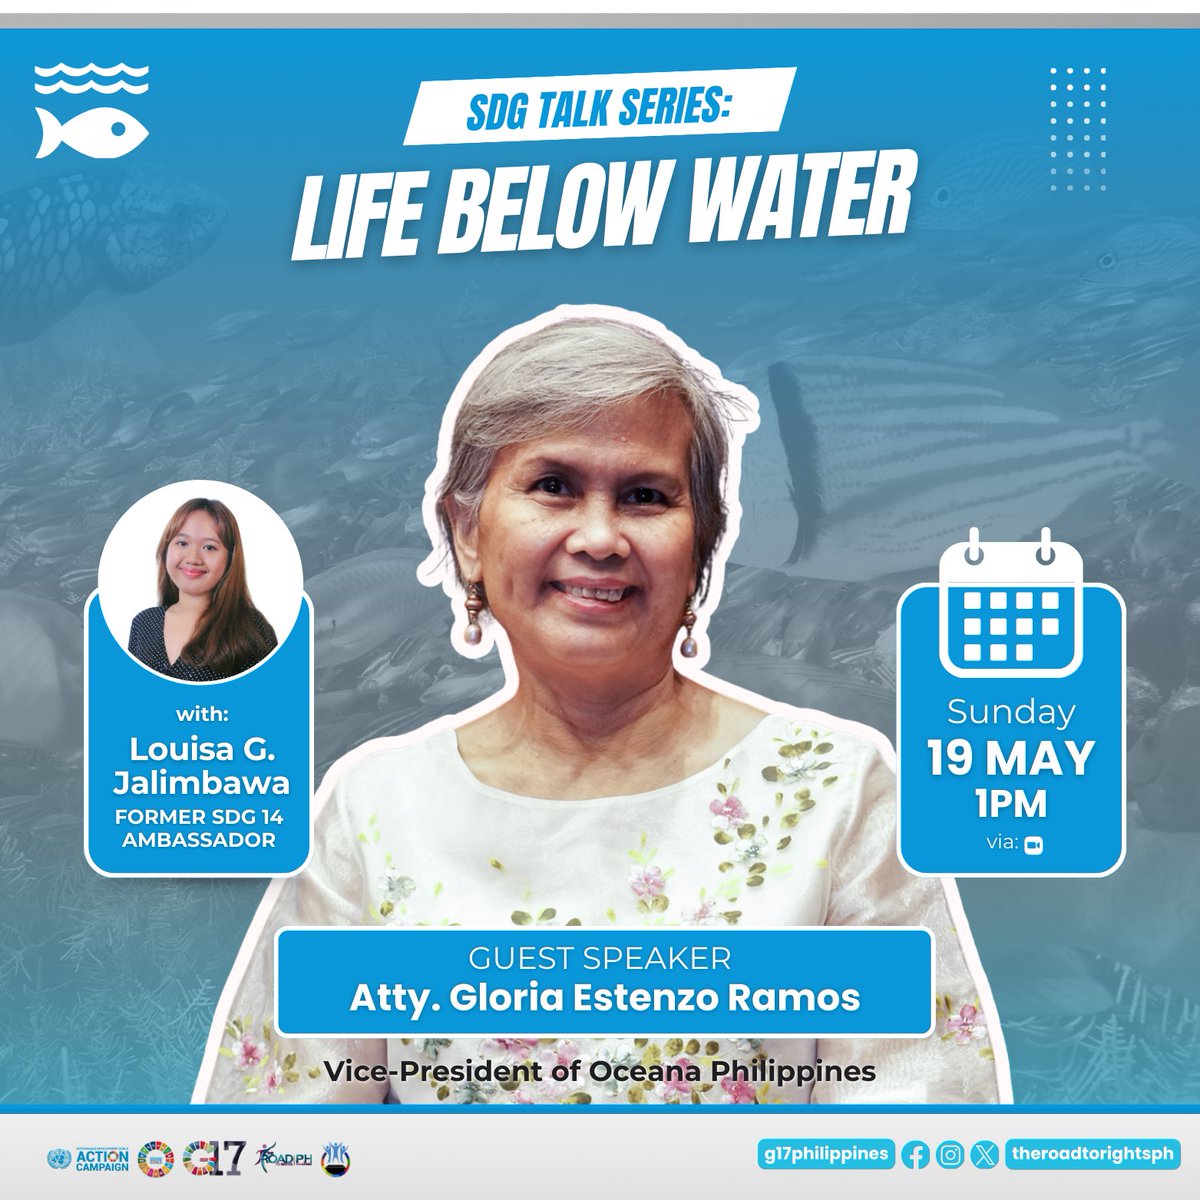 💙𝑺𝒆𝒕 𝒔𝒂𝒊𝒍 𝒇𝒐𝒓 𝒂𝒏 𝒐𝒄𝒆𝒂𝒏𝒊𝒄 𝒘𝒊𝒔𝒅𝒐𝒎🌊

Join us on May 19, 2024, at 1 PM via Zoom for an enlightening discussion of SDG Talk Series: Life Below Water, featuring two remarkable advocates for marine sustainability. 🌎♻️

#SDG14
#LifeBelowWater
#GlobalGoals